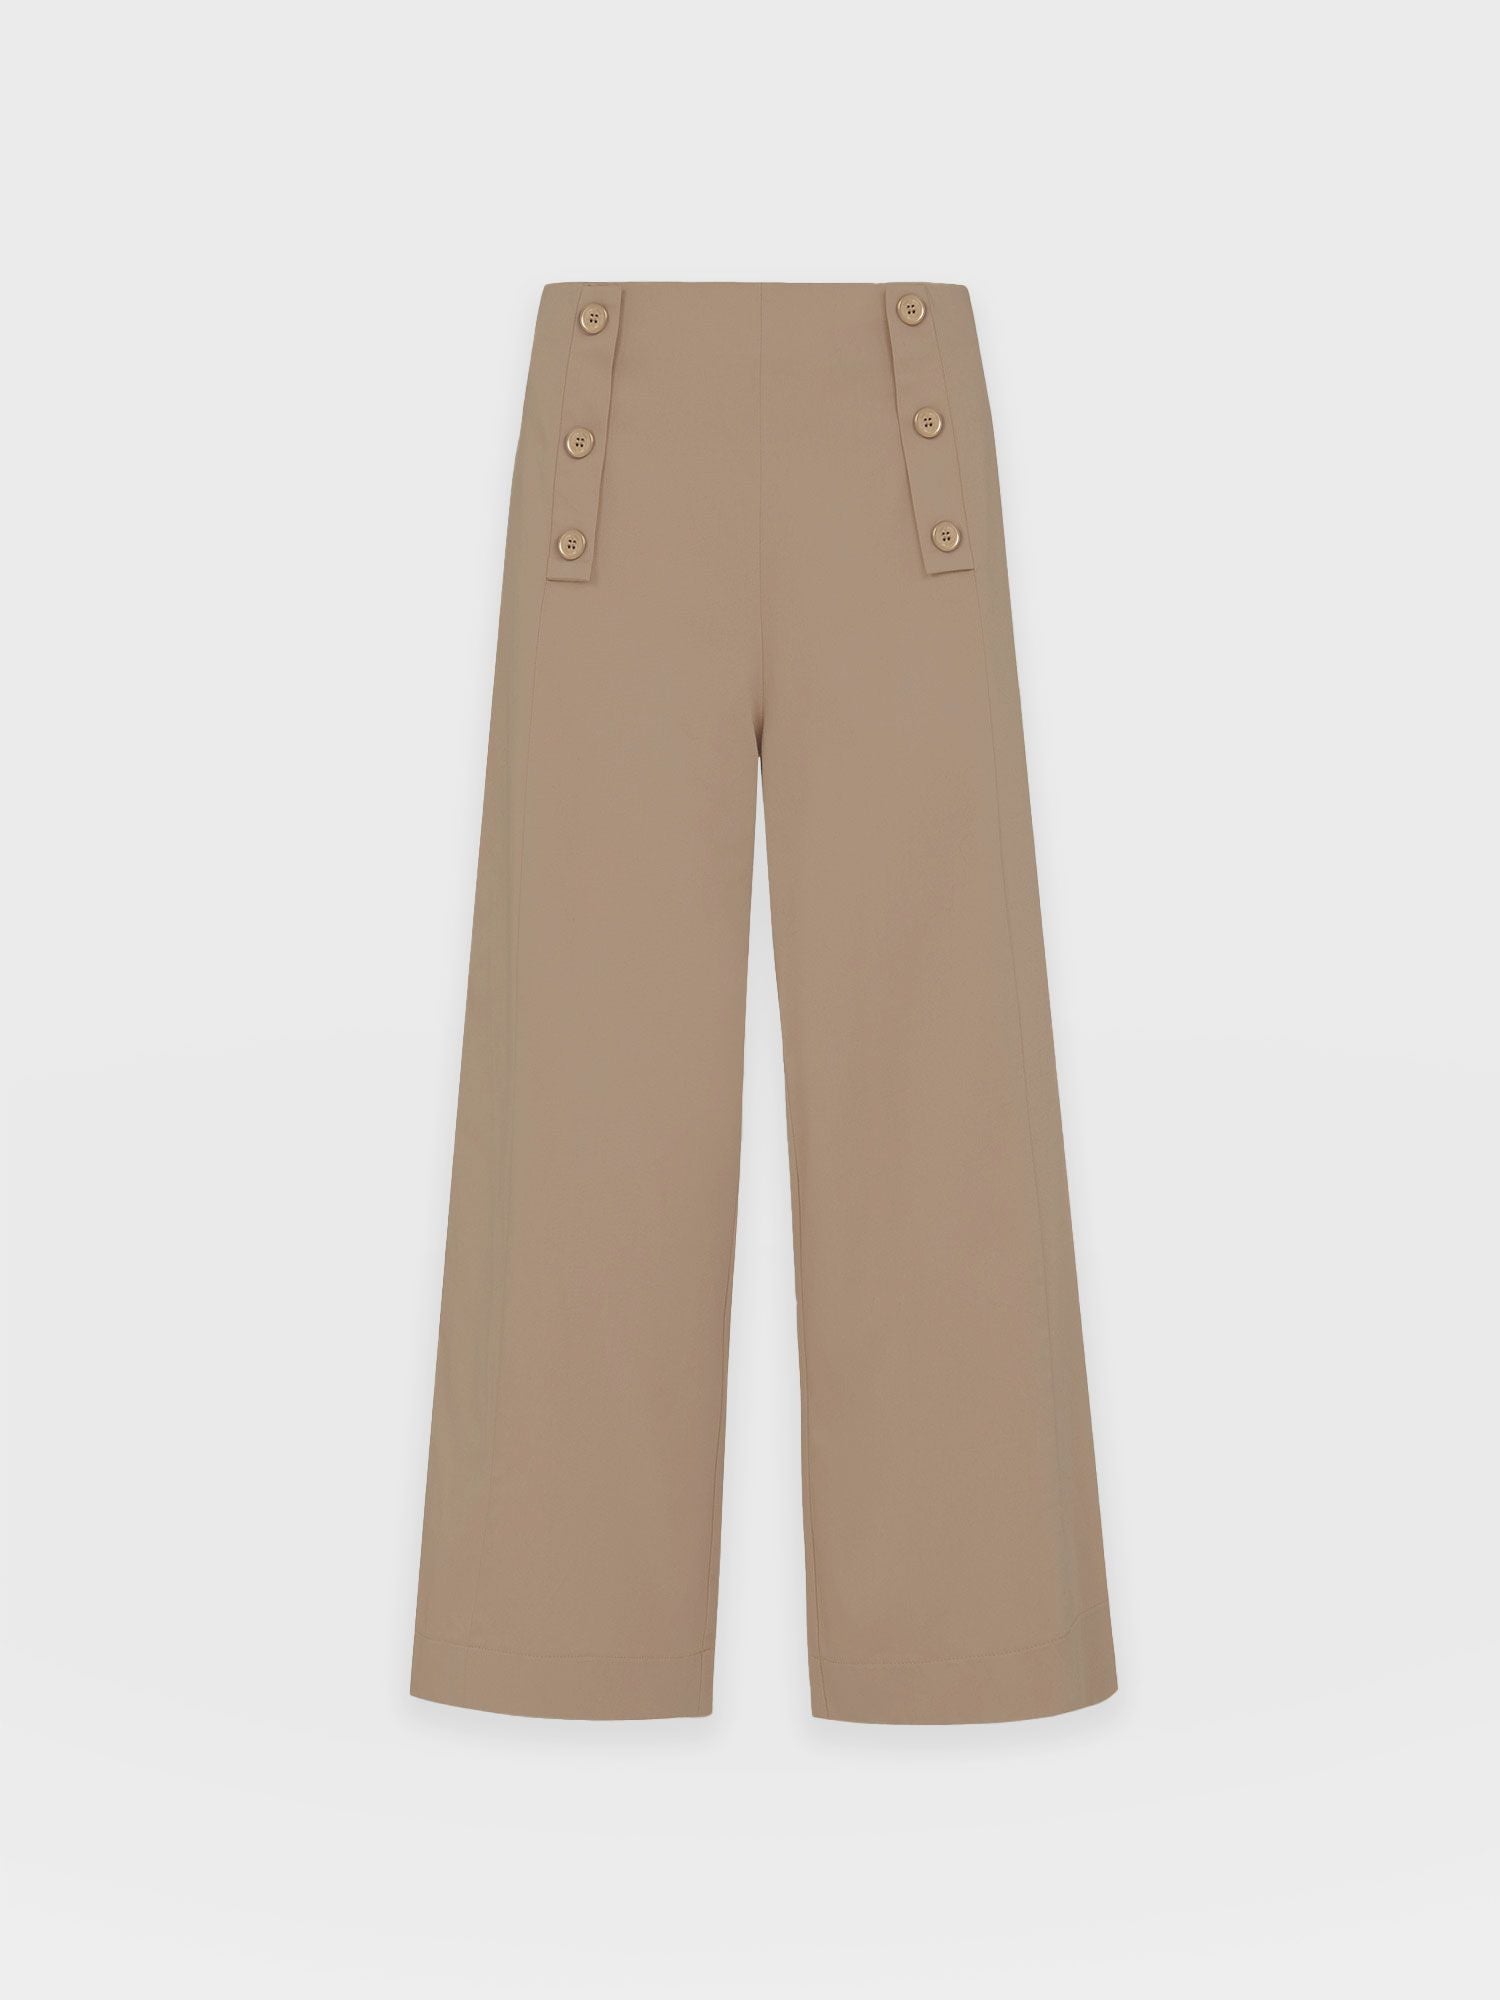 Mango Women's Darts Detail Culotte Leather Trousers | CoolSprings Galleria